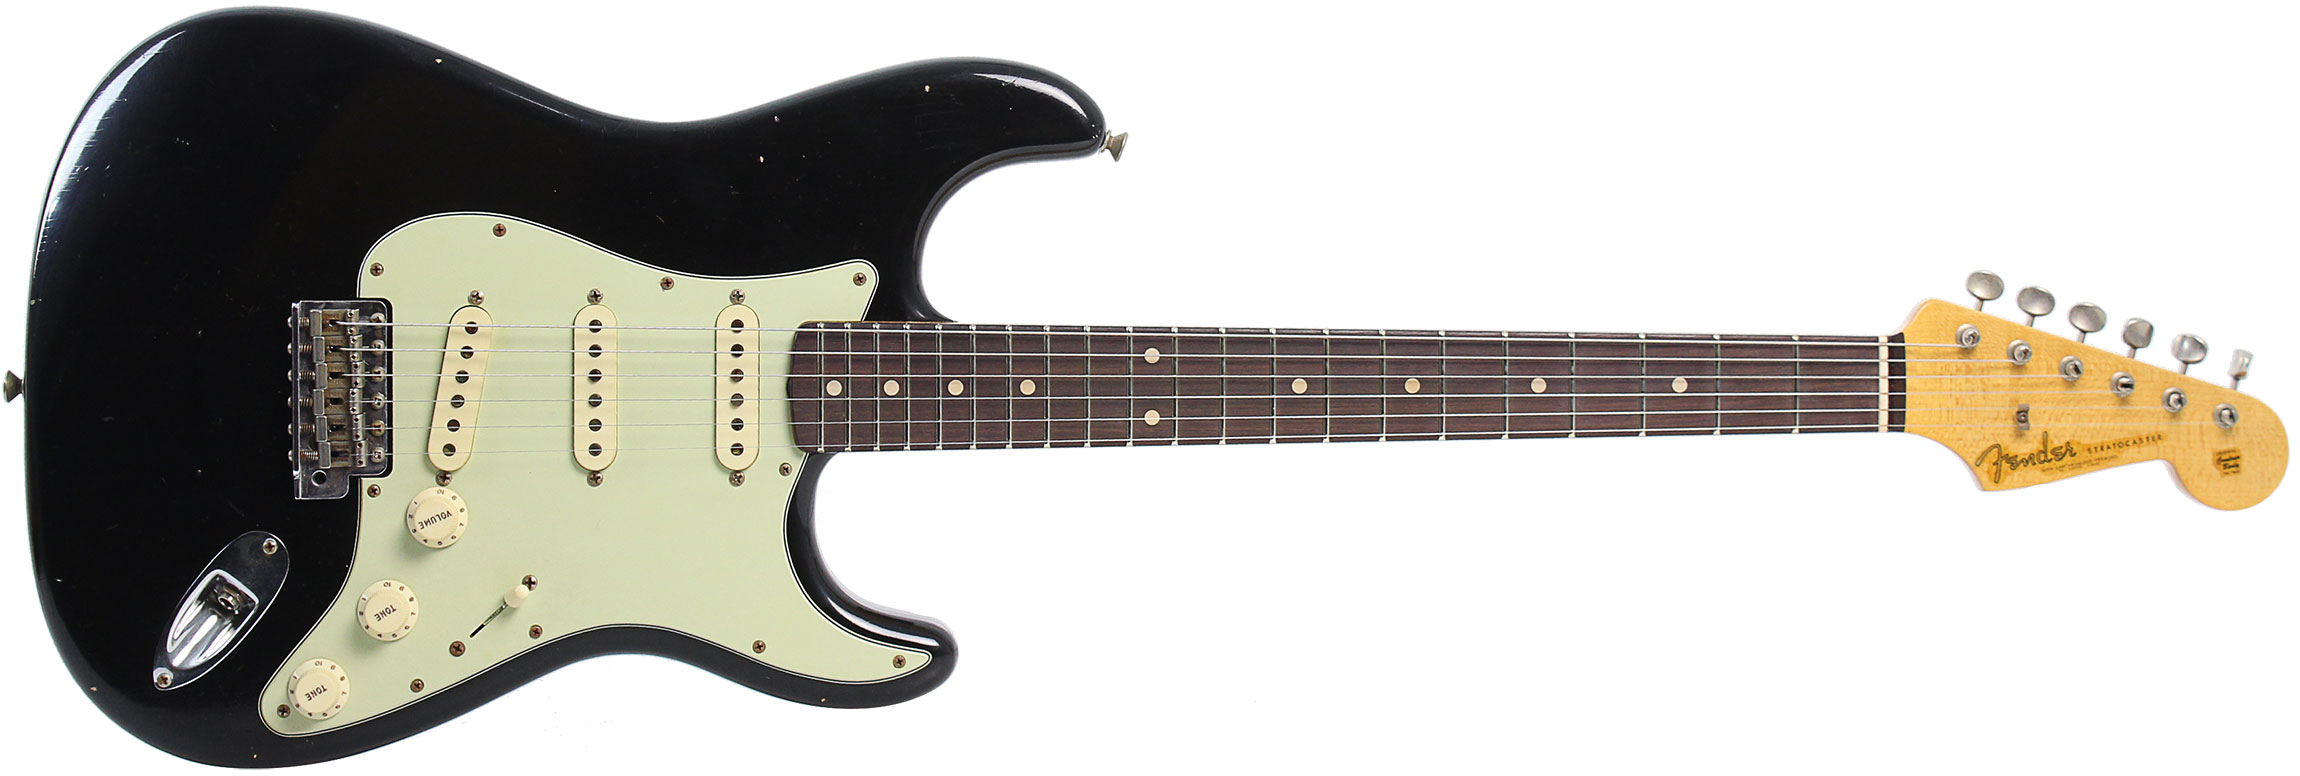 GUITARRA FENDER 61 STRATOCASTER JOURNEY RELIC TIME MACHINE COLLECTION 923-1007-534 AGED BLACK